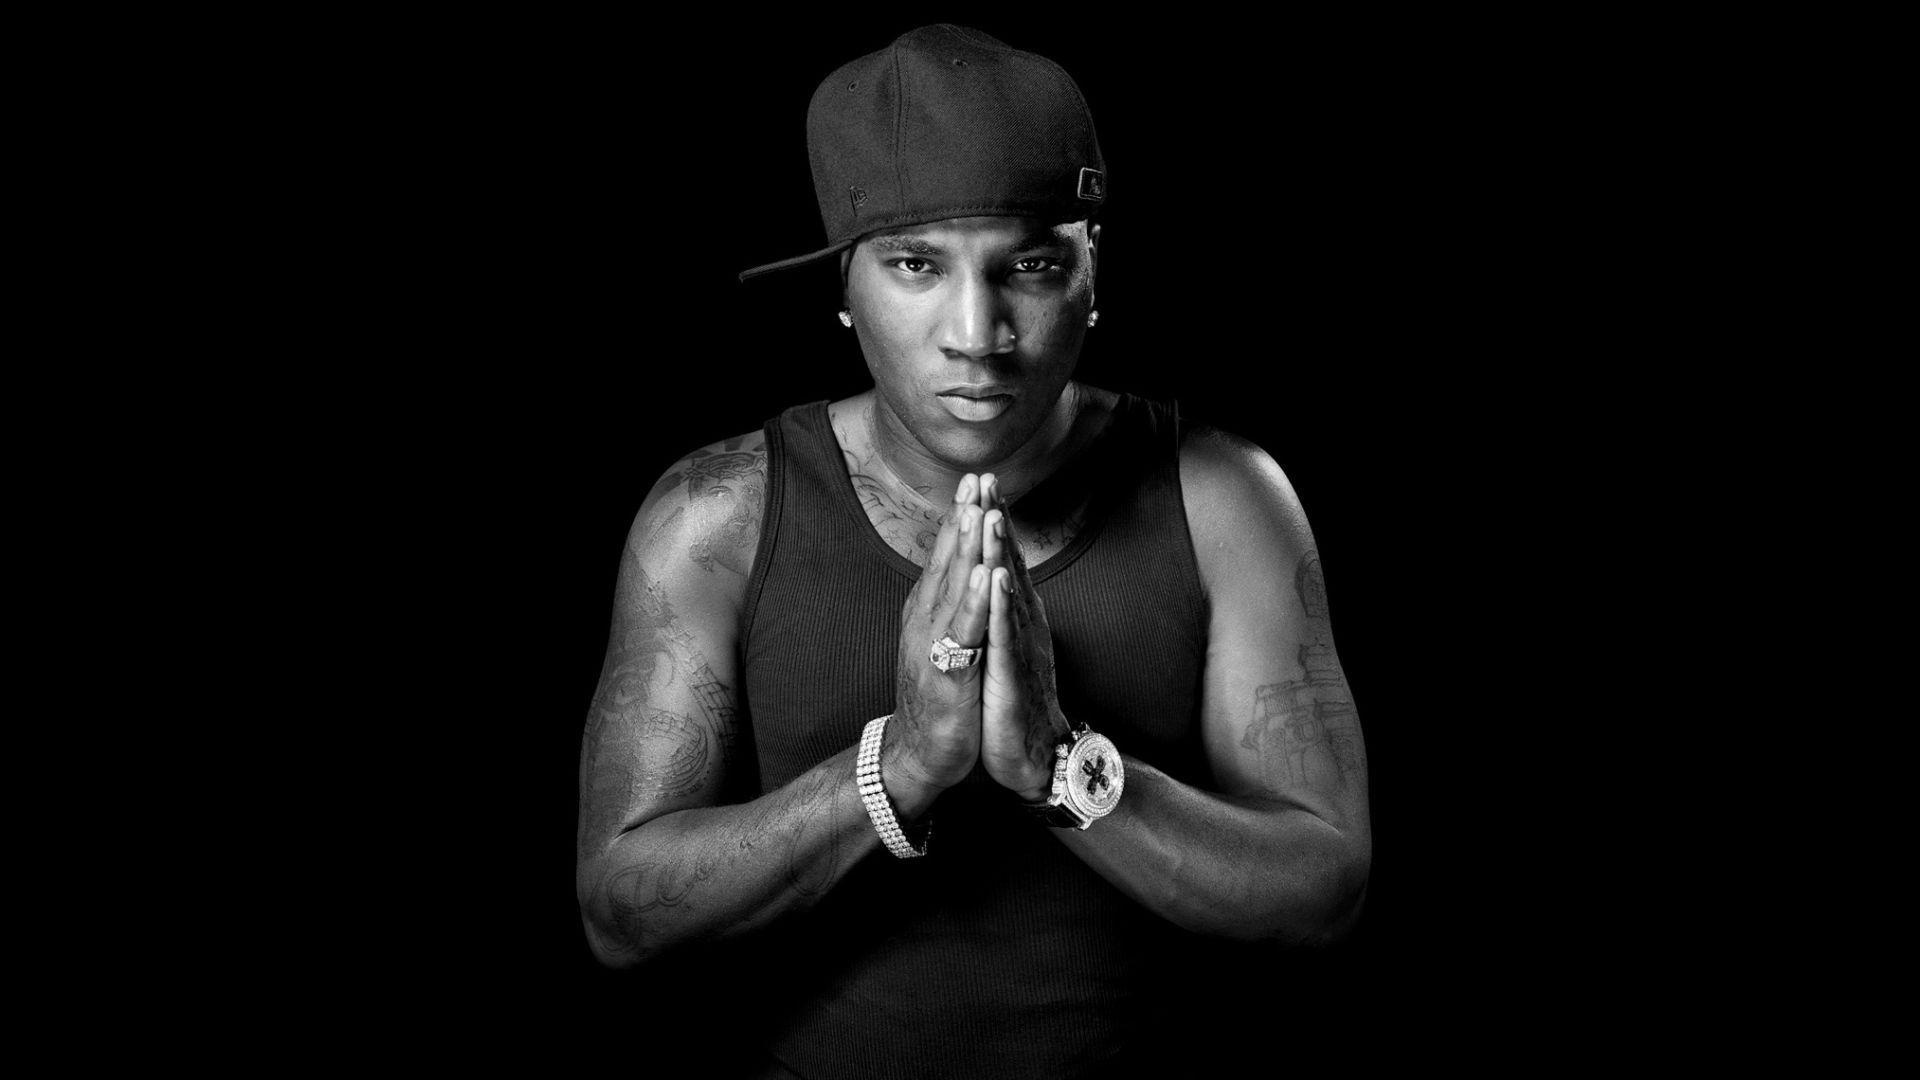 Young Jeezy Wallpapers - Top Free Young Jeezy Backgrounds 1920x1080